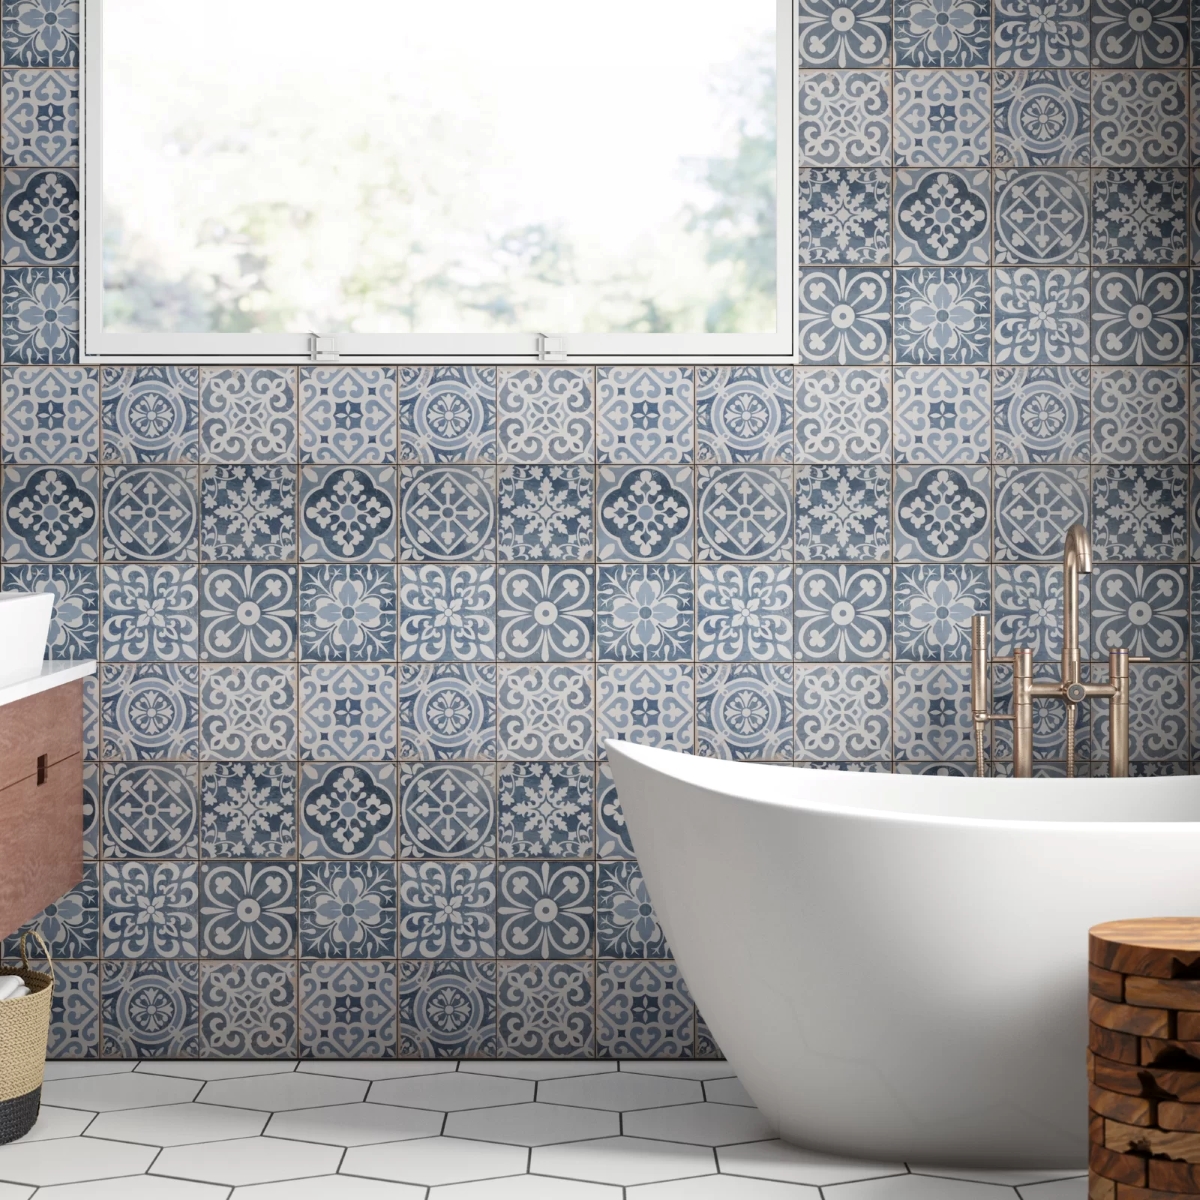 Bathroom with blue patterned tiles